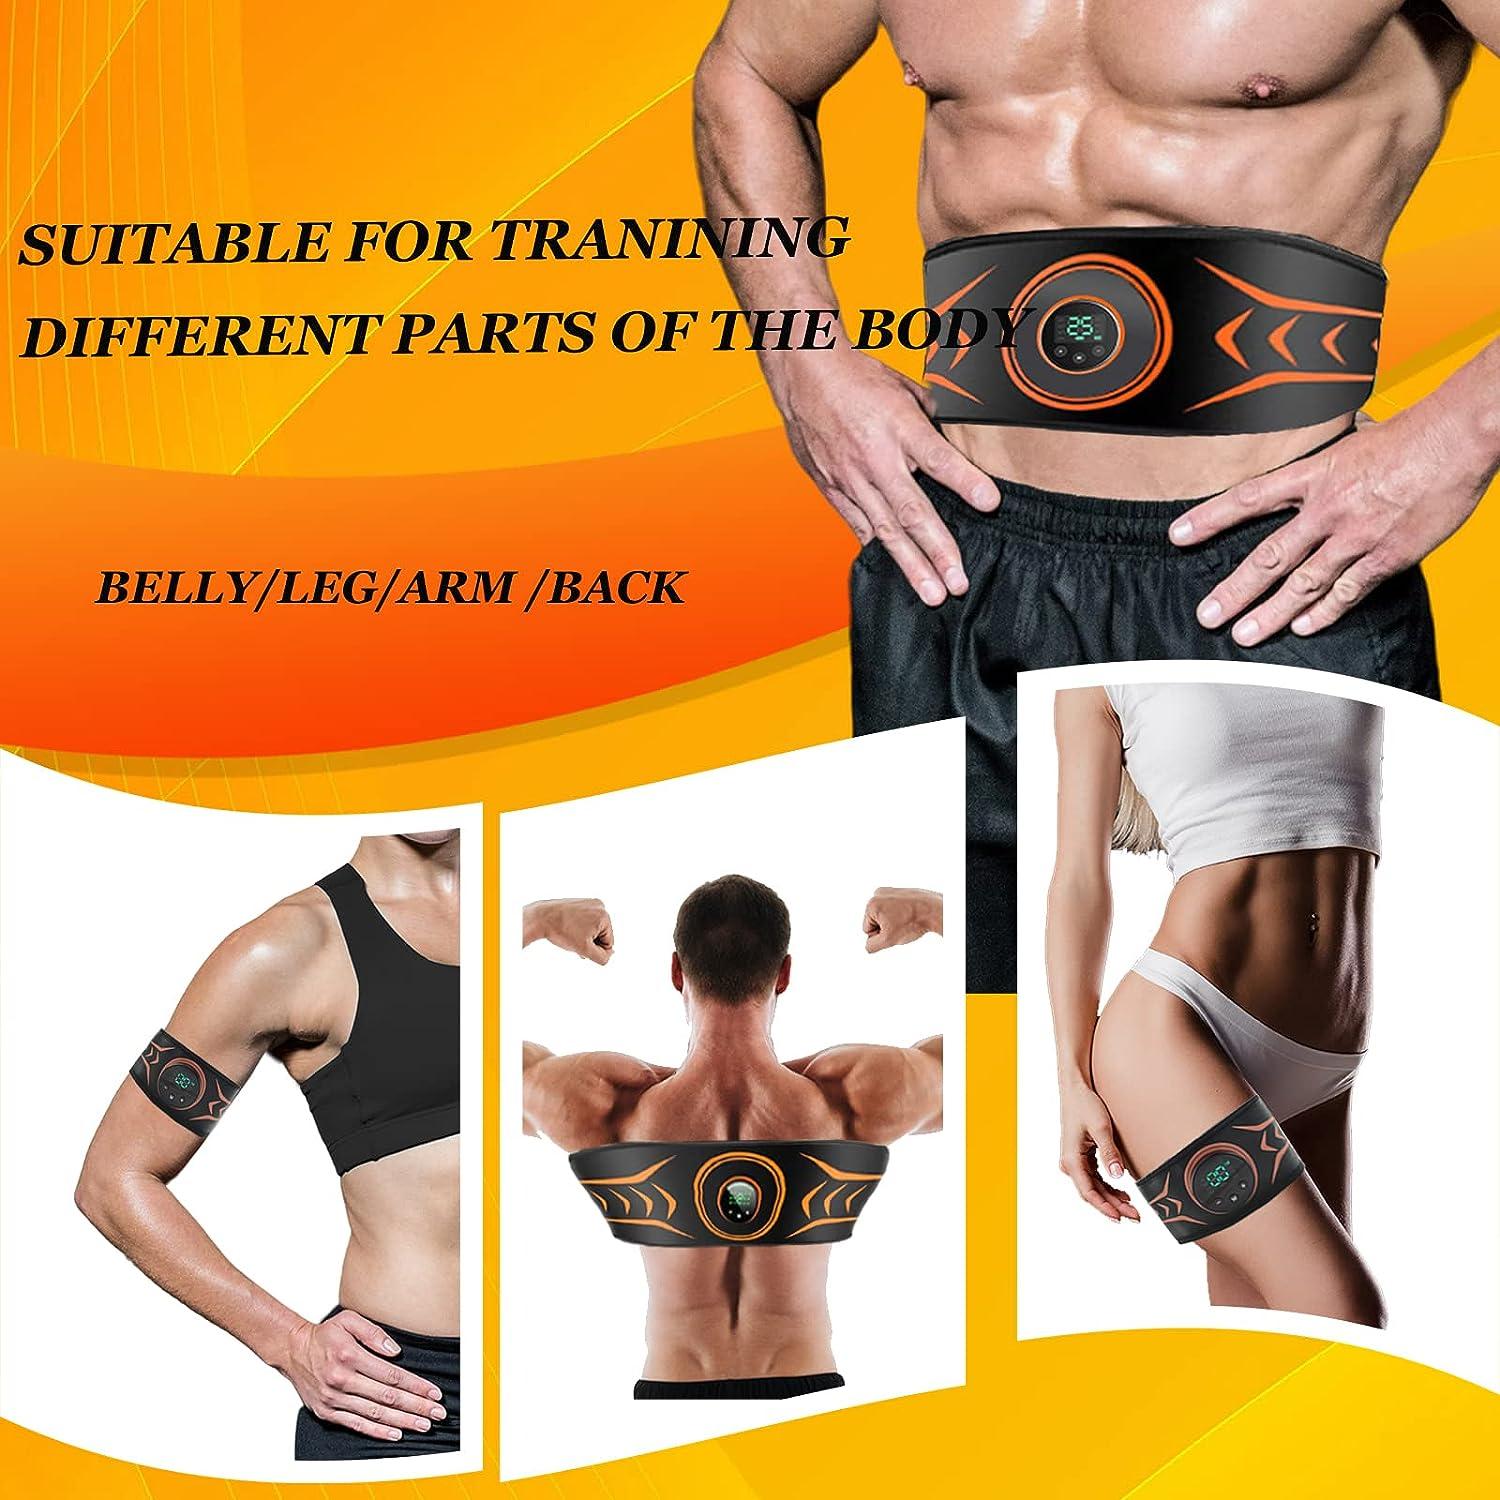  Muscle Toner ABS Training Workout Belt Body Abdominal Toning  Gear Waist Trimmer Ab Workouts Intelligent Portable Fitness Apparatus for  Men Women Abdomen/Arm/Leg Home Office Exercise : Sports & Outdoors